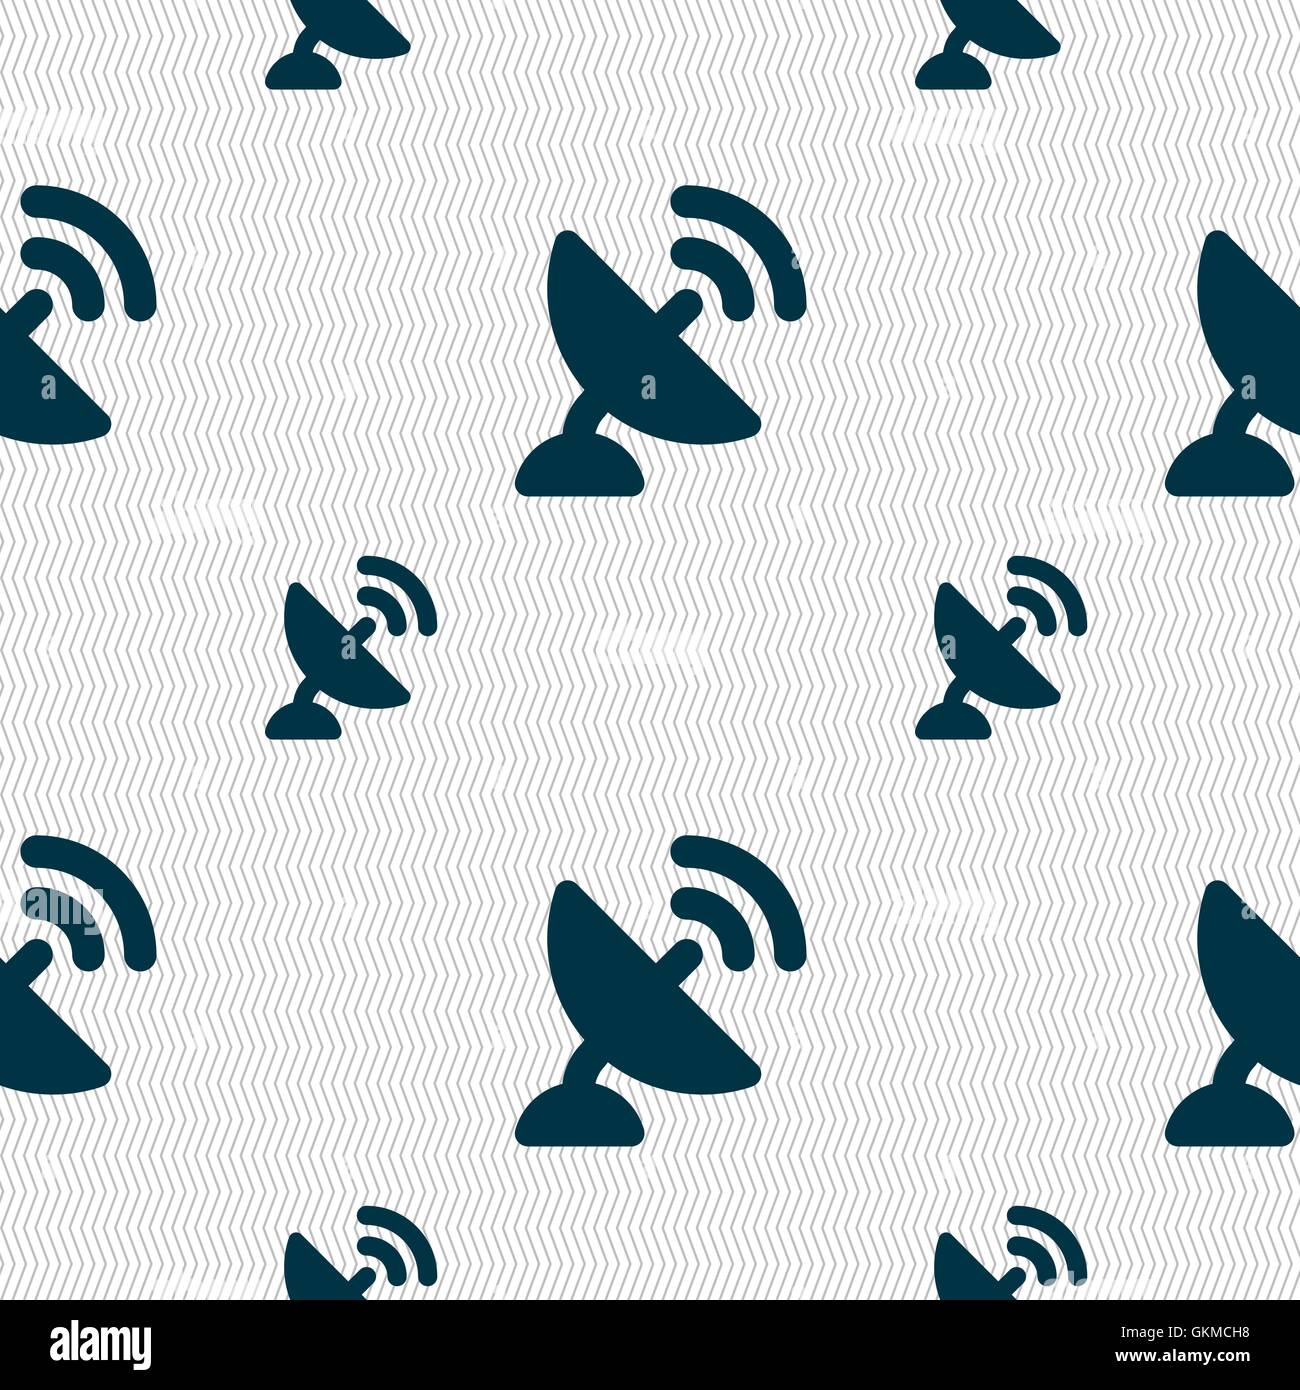 satellite antenna icon sign. Seamless pattern with geometric texture. Vector Stock Vector